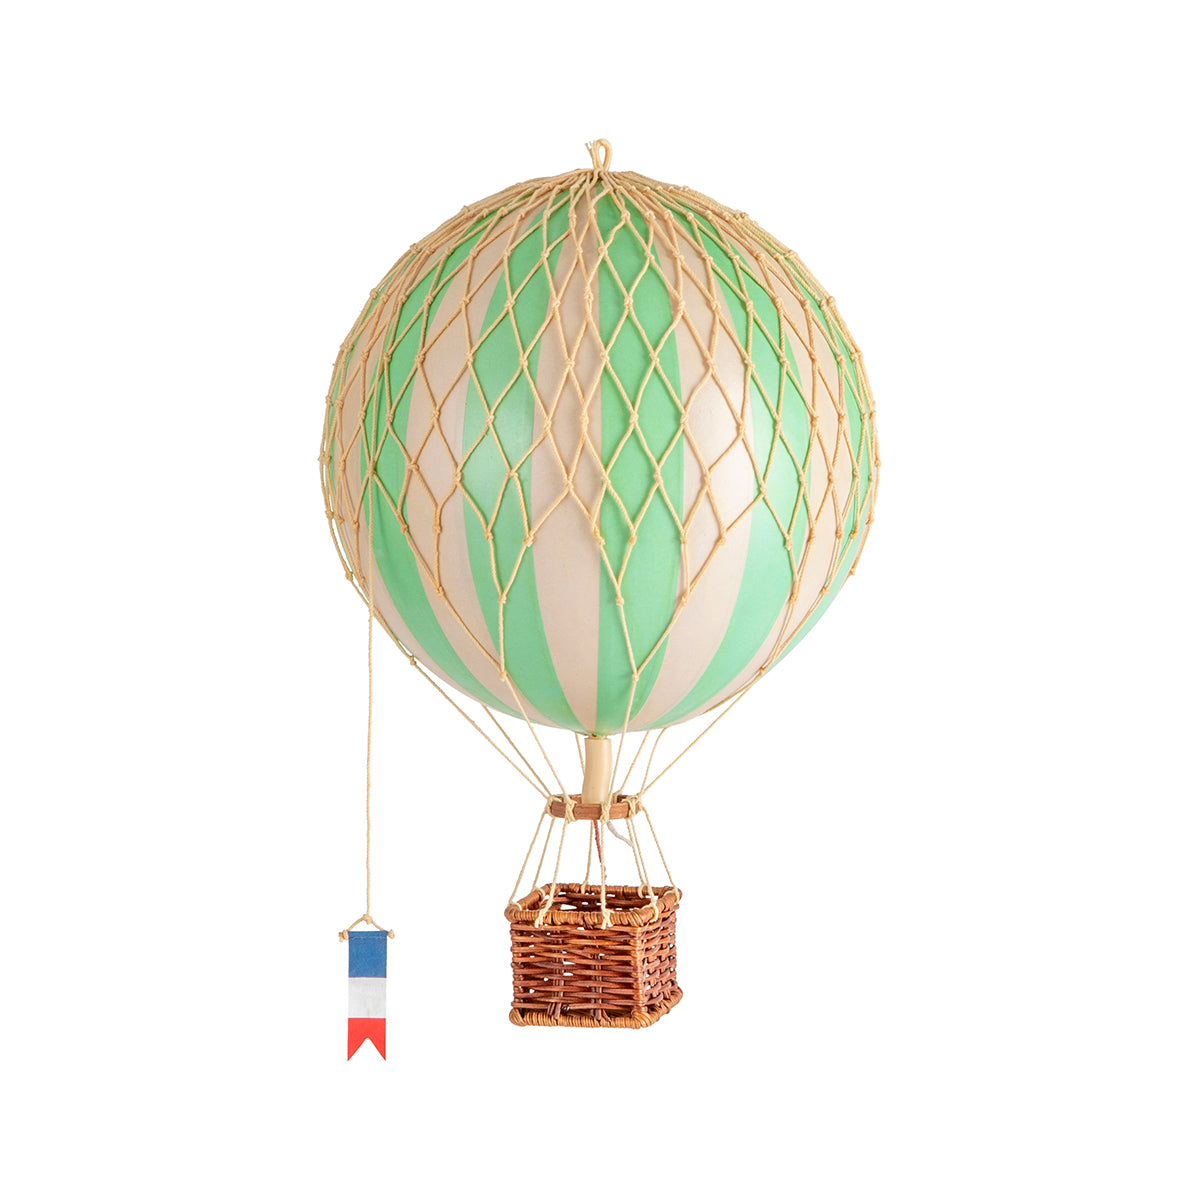 A quirky Wonderen Small Hot Air Balloon - Travels Light with a green and white design floating against a white background.